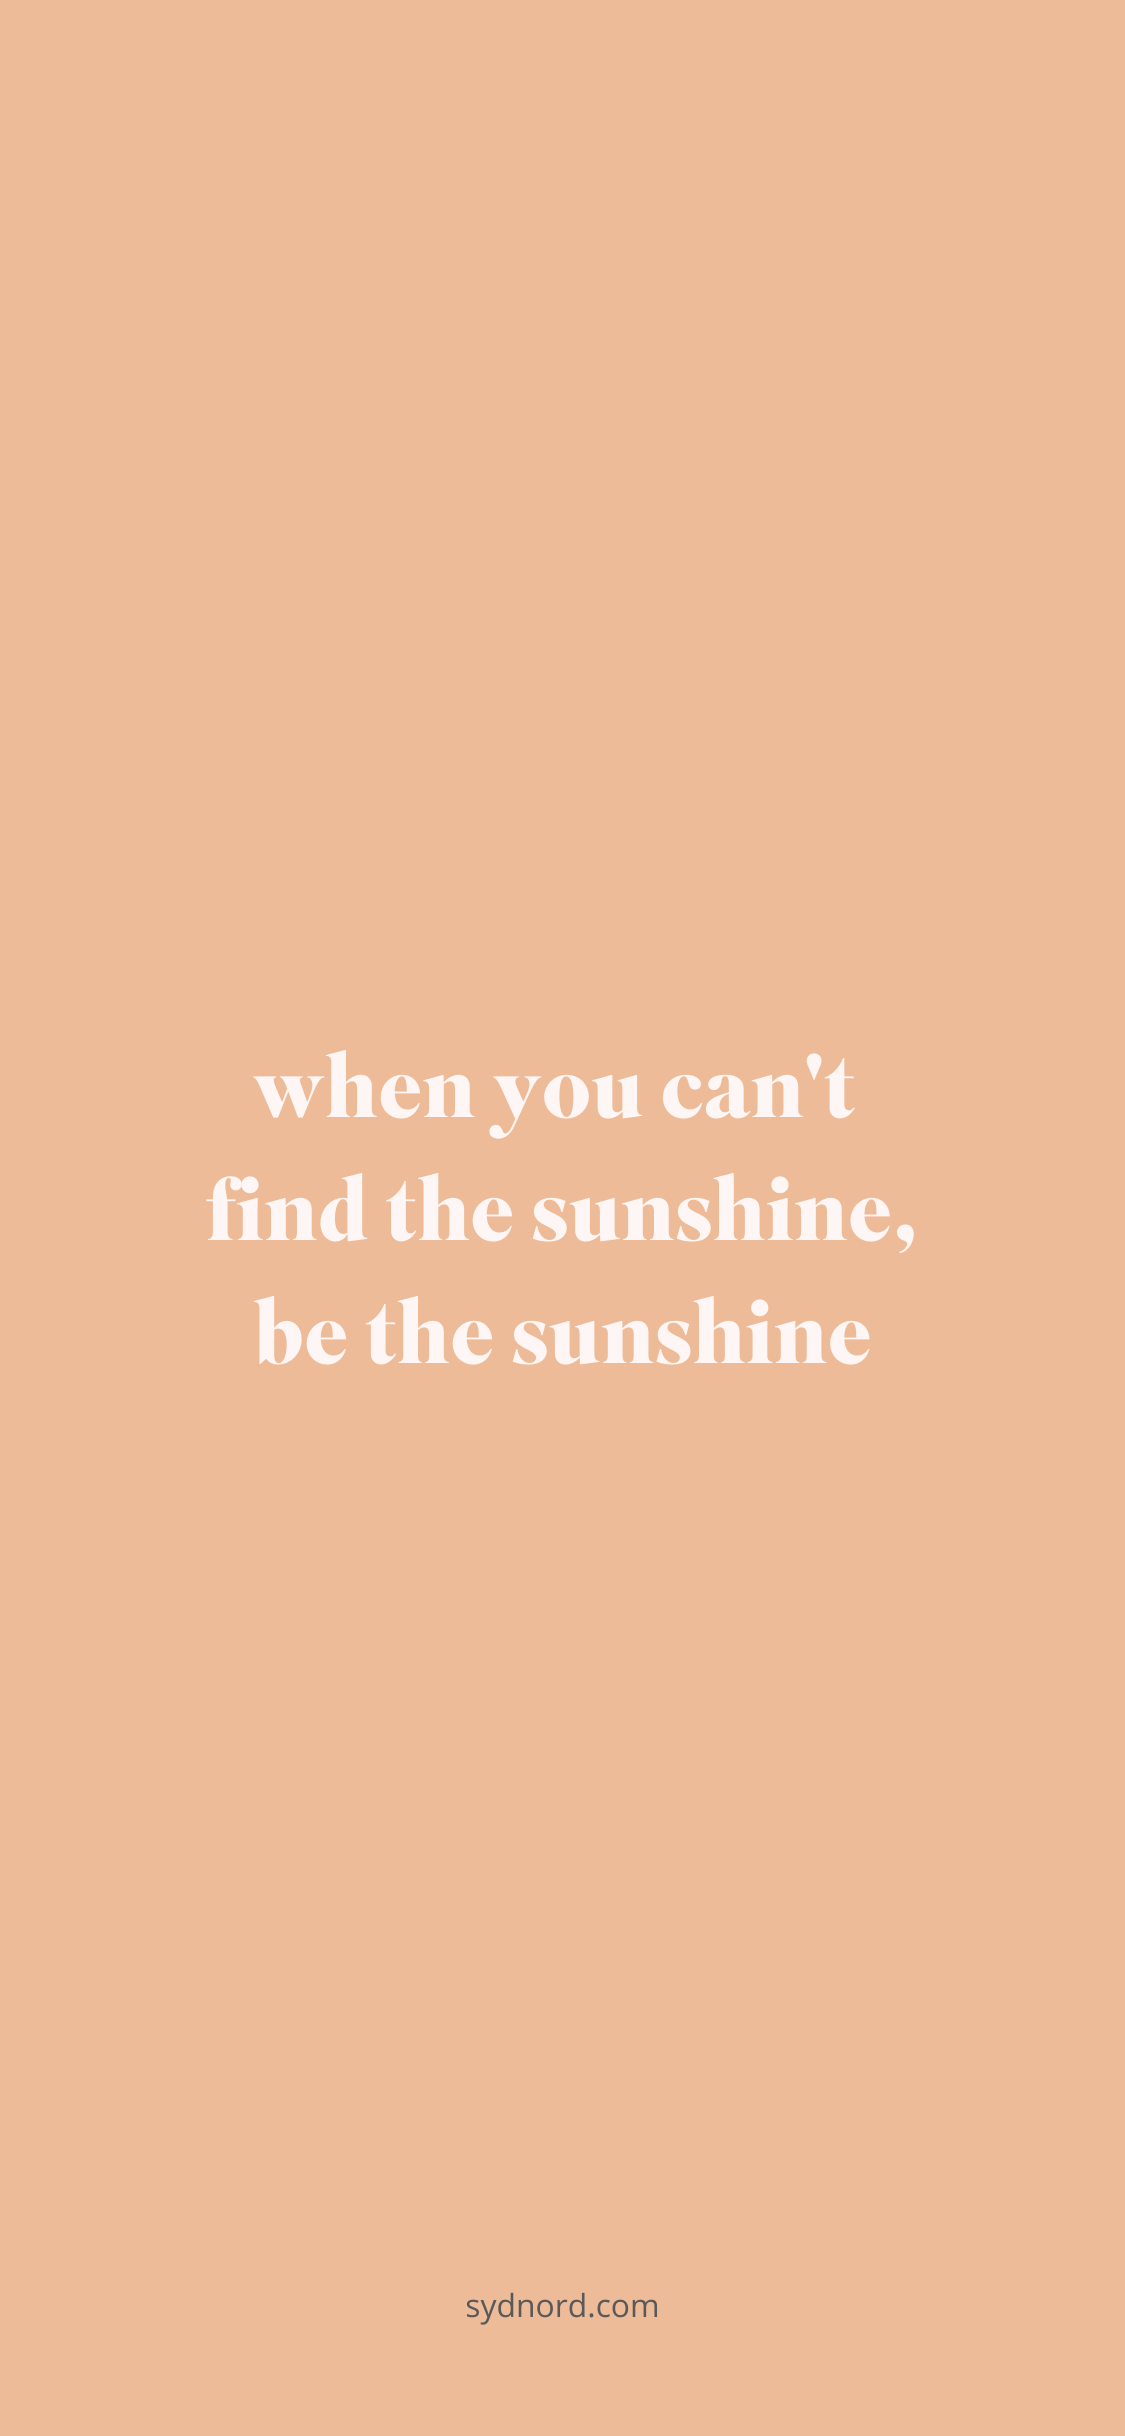 Positive message quotes: When you can't find the sunshine, be the sunshine